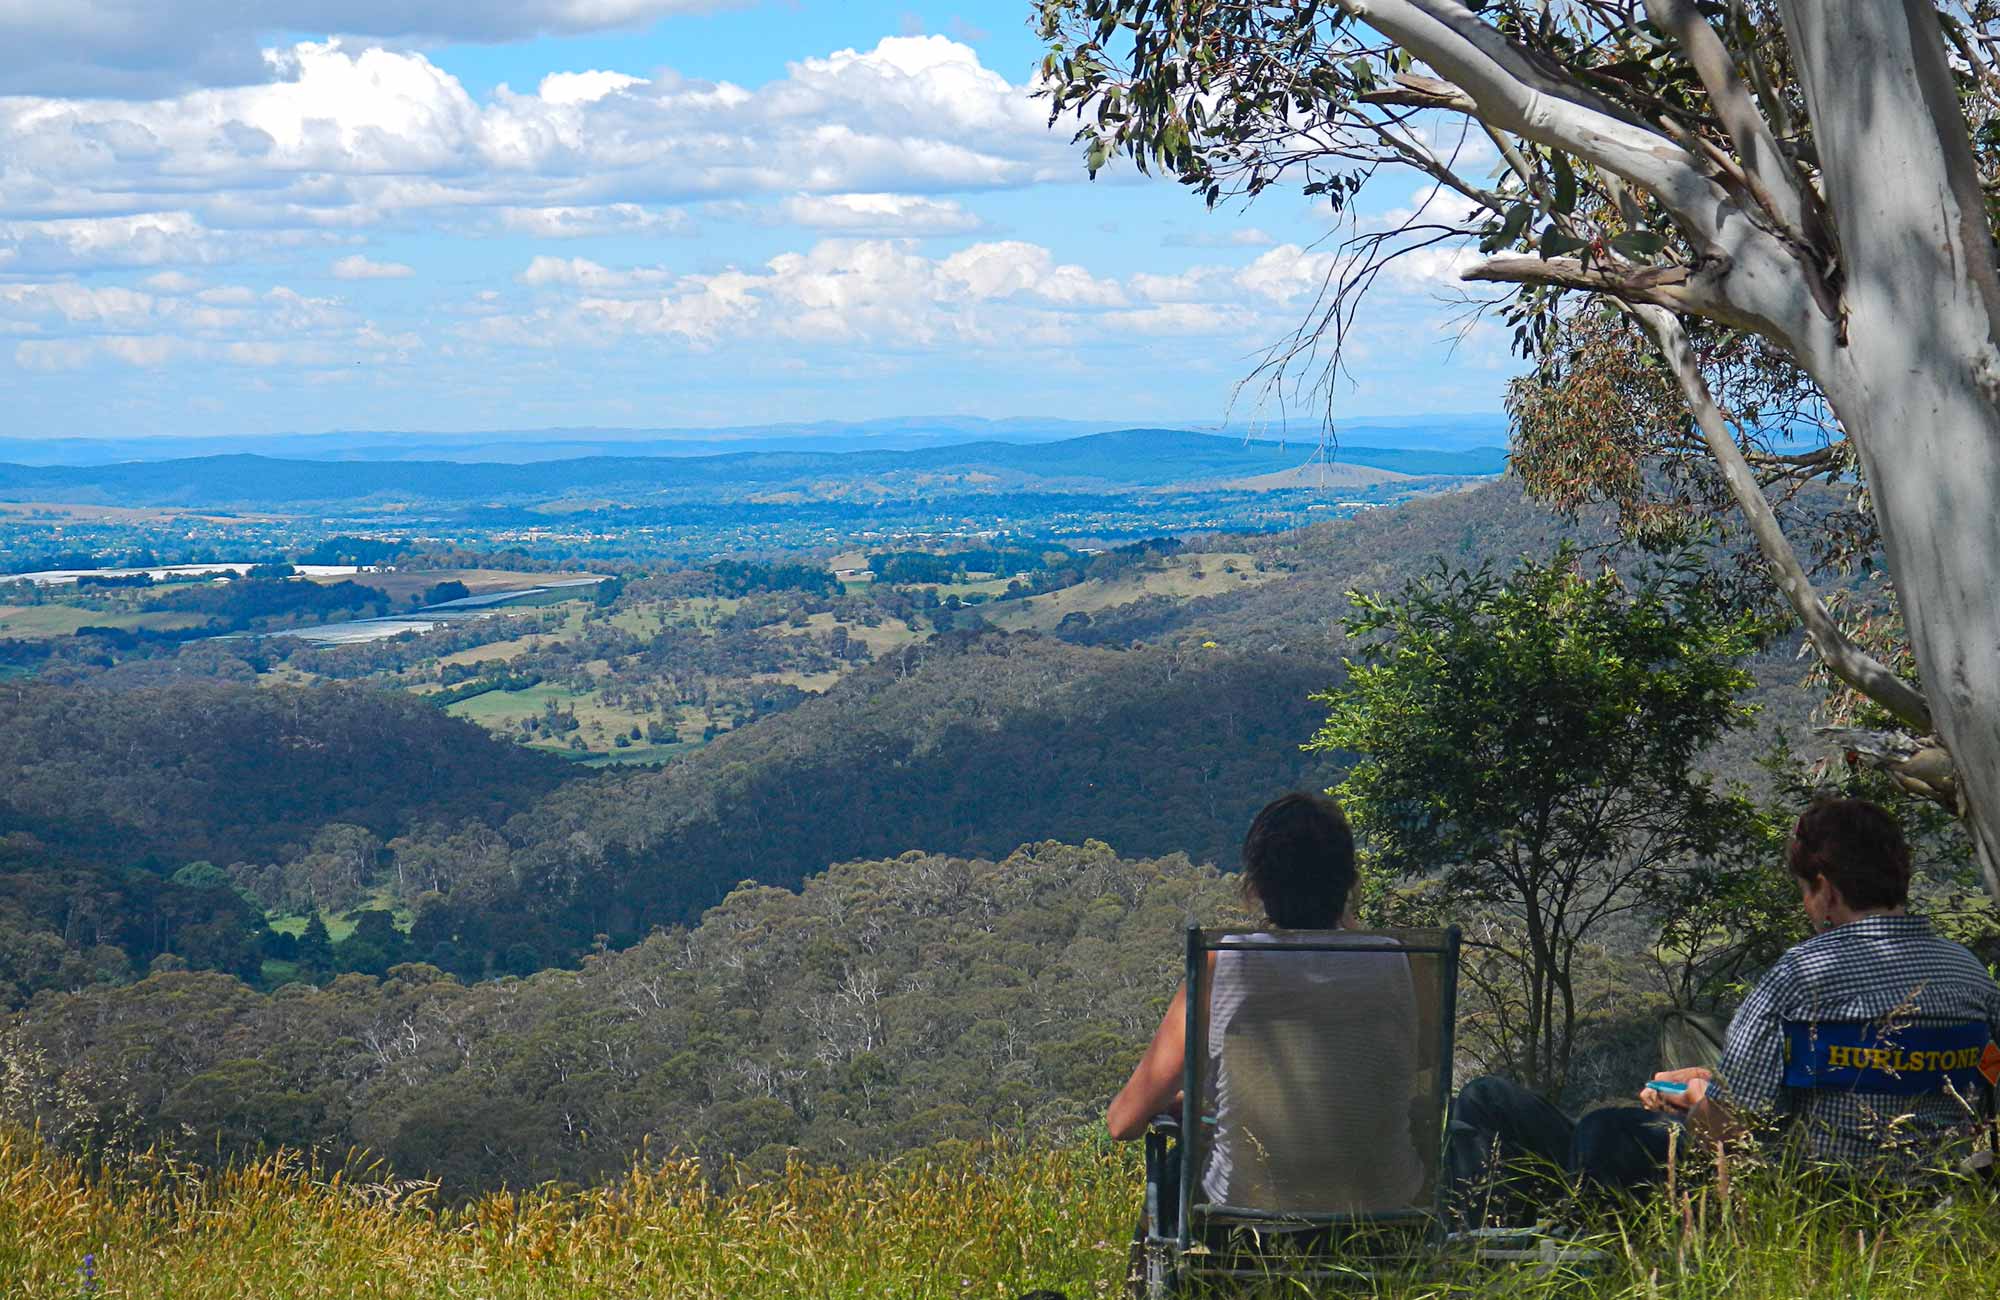 People enjoying the view over the valley. Photo:Debby McGerty